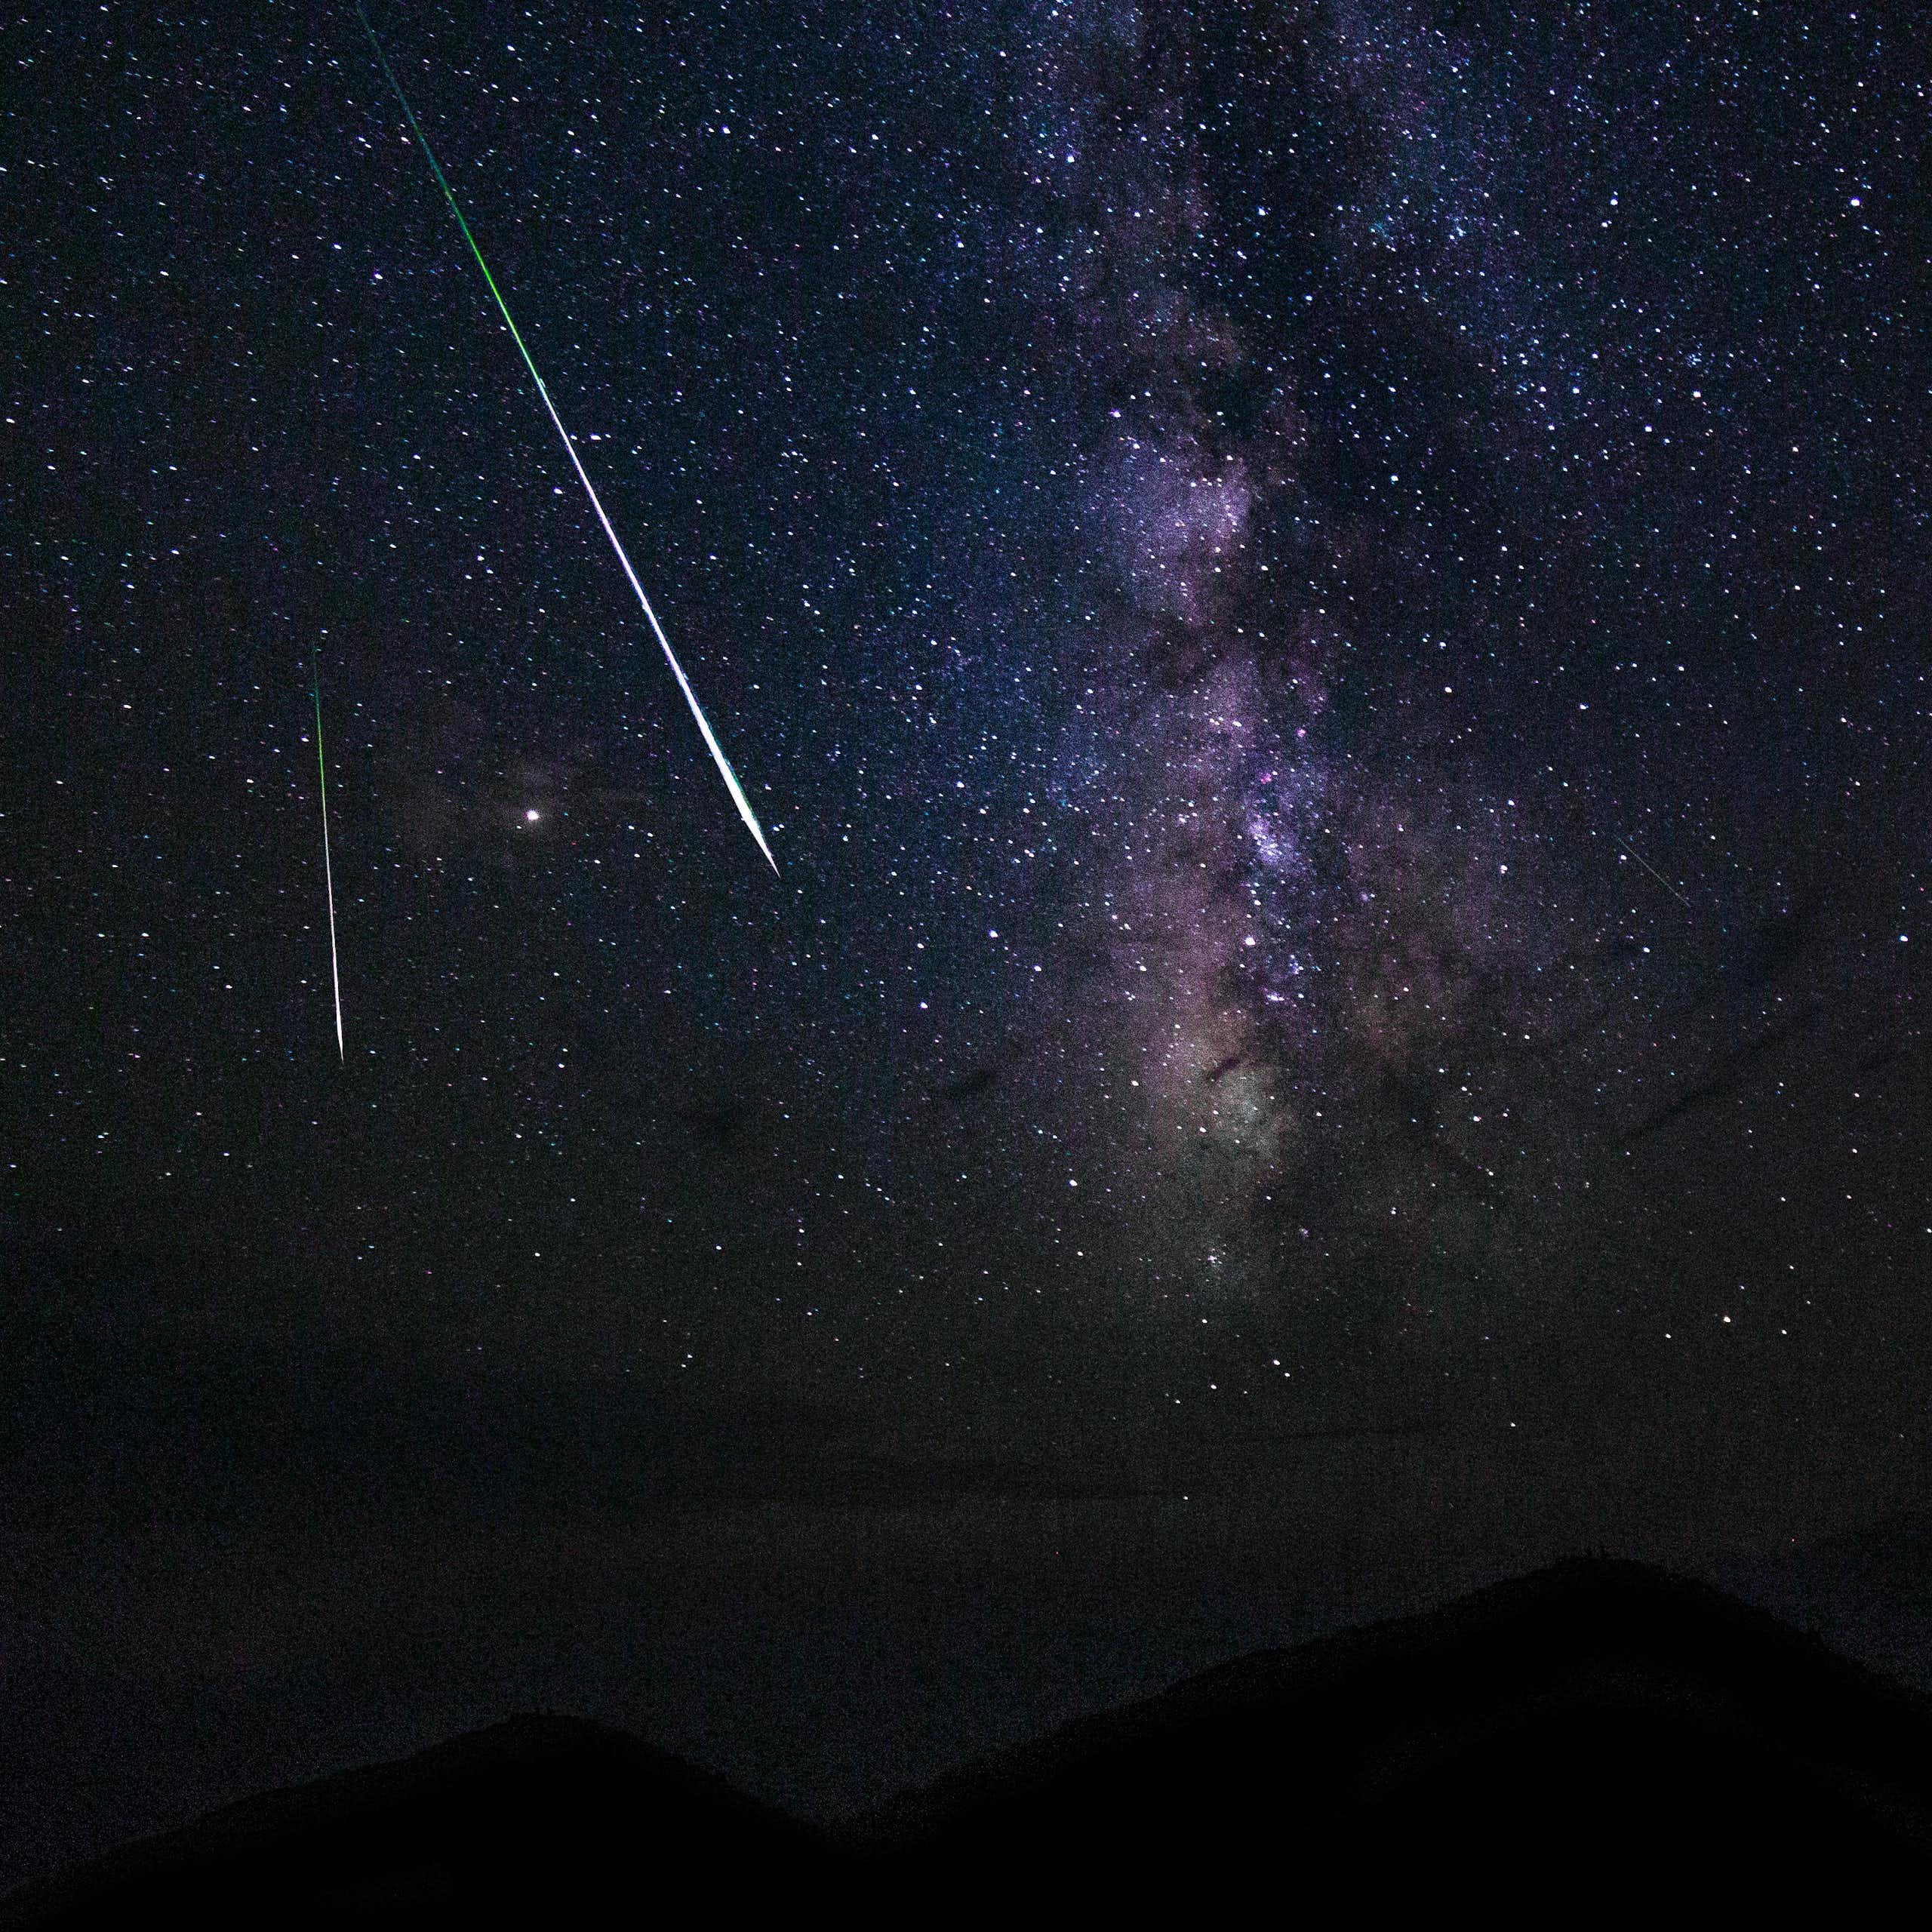 Two shooting stars in the night sky above dark mountains.